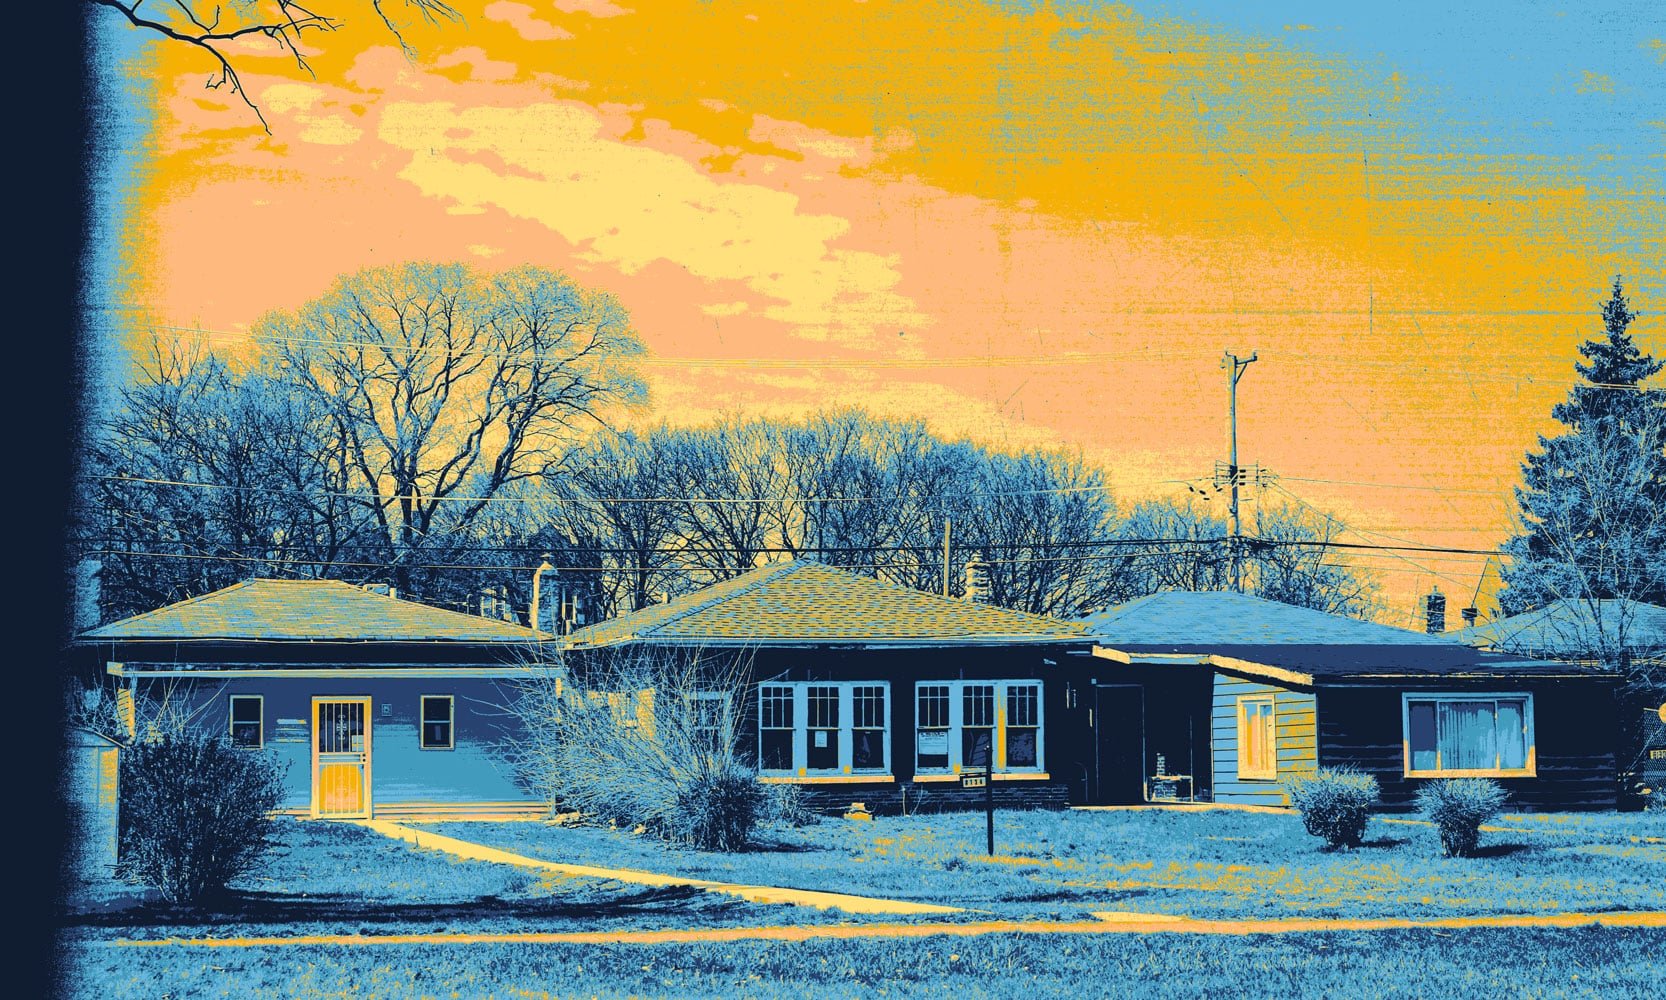 Stylized photo of 'Garlow' homes in Chatham